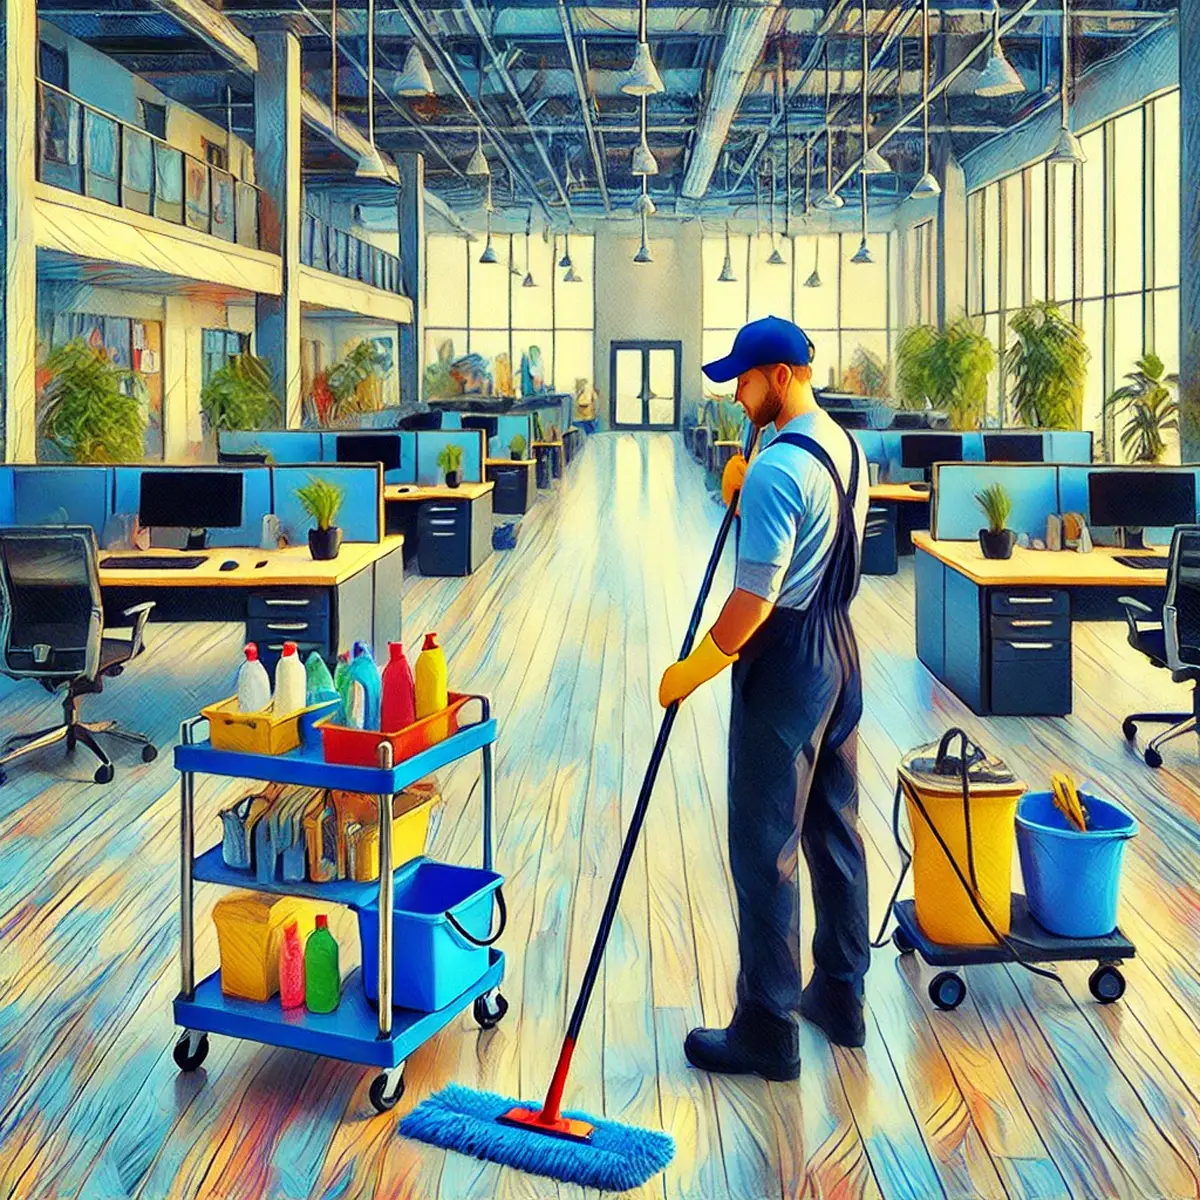 Janitorial Services Proposal Concepts